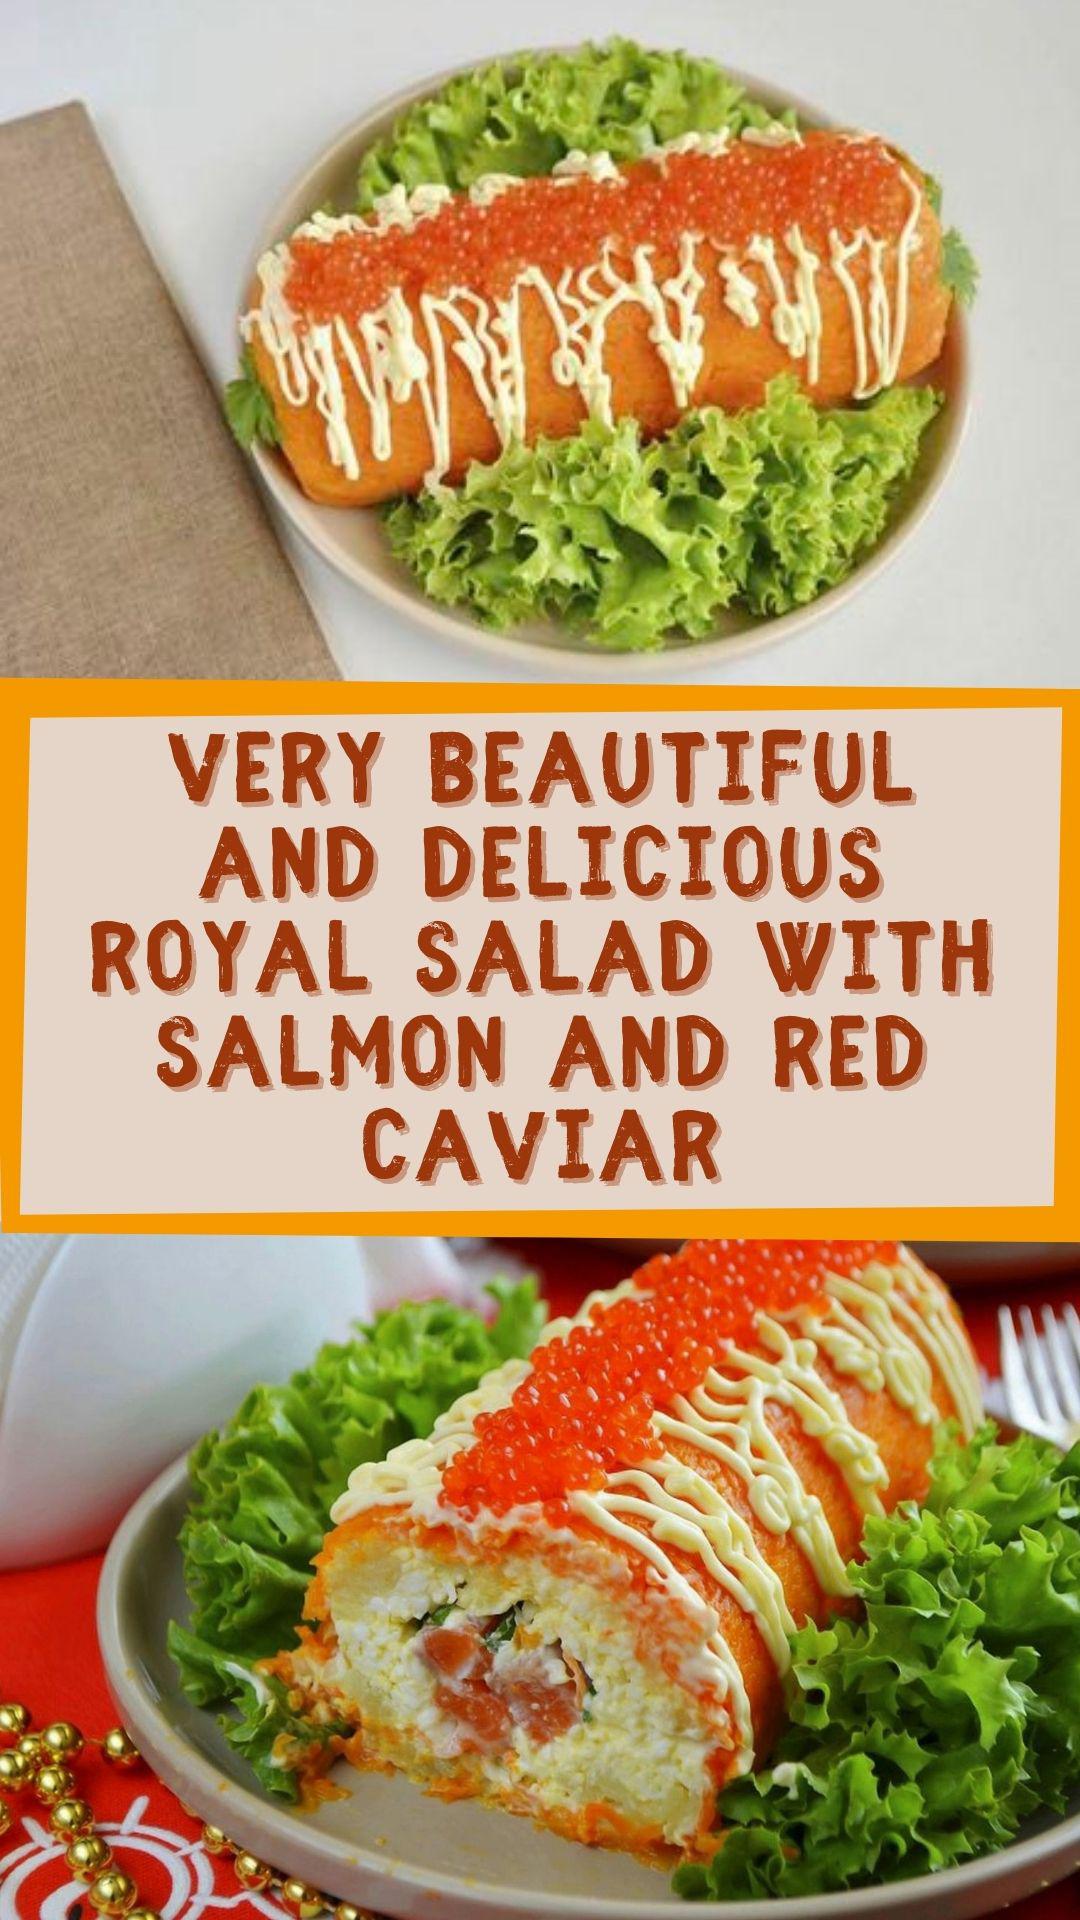 Very beautiful and delicious royal salad with salmon and red caviar